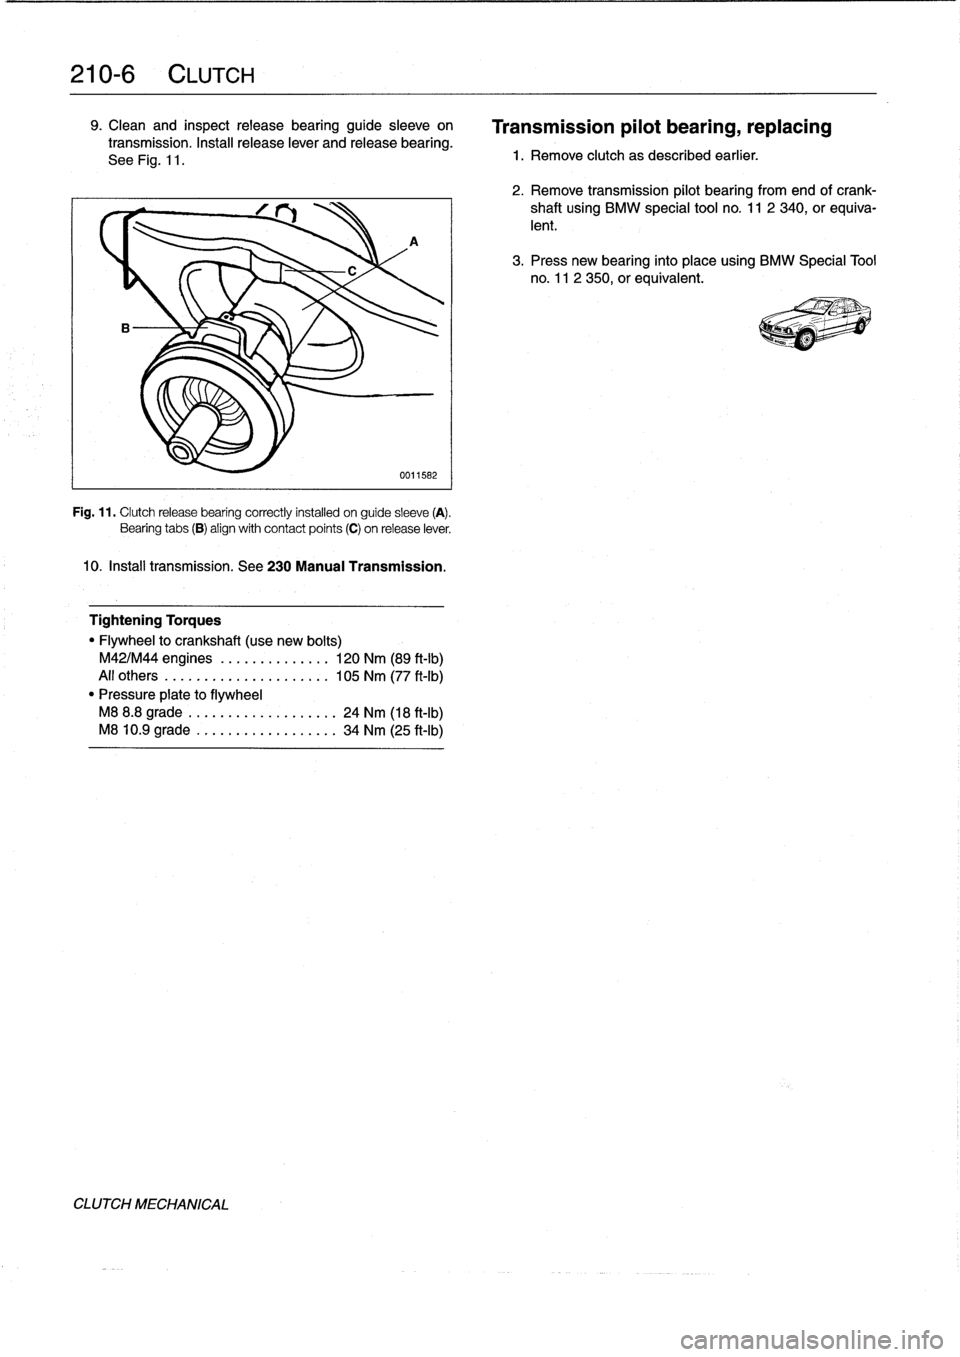 BMW 318i 1998 E36 User Guide 
210-
6
CLUTCH

9
.
Clean
and
inspectrelease
bearing
guide
sleeve
on

transmission
.
Install
release
lever
and
release
bearing
.

See
Fig
.
11
.

A

0011582

Fig
.
11
.
Clutchrelease
bearing
correctly